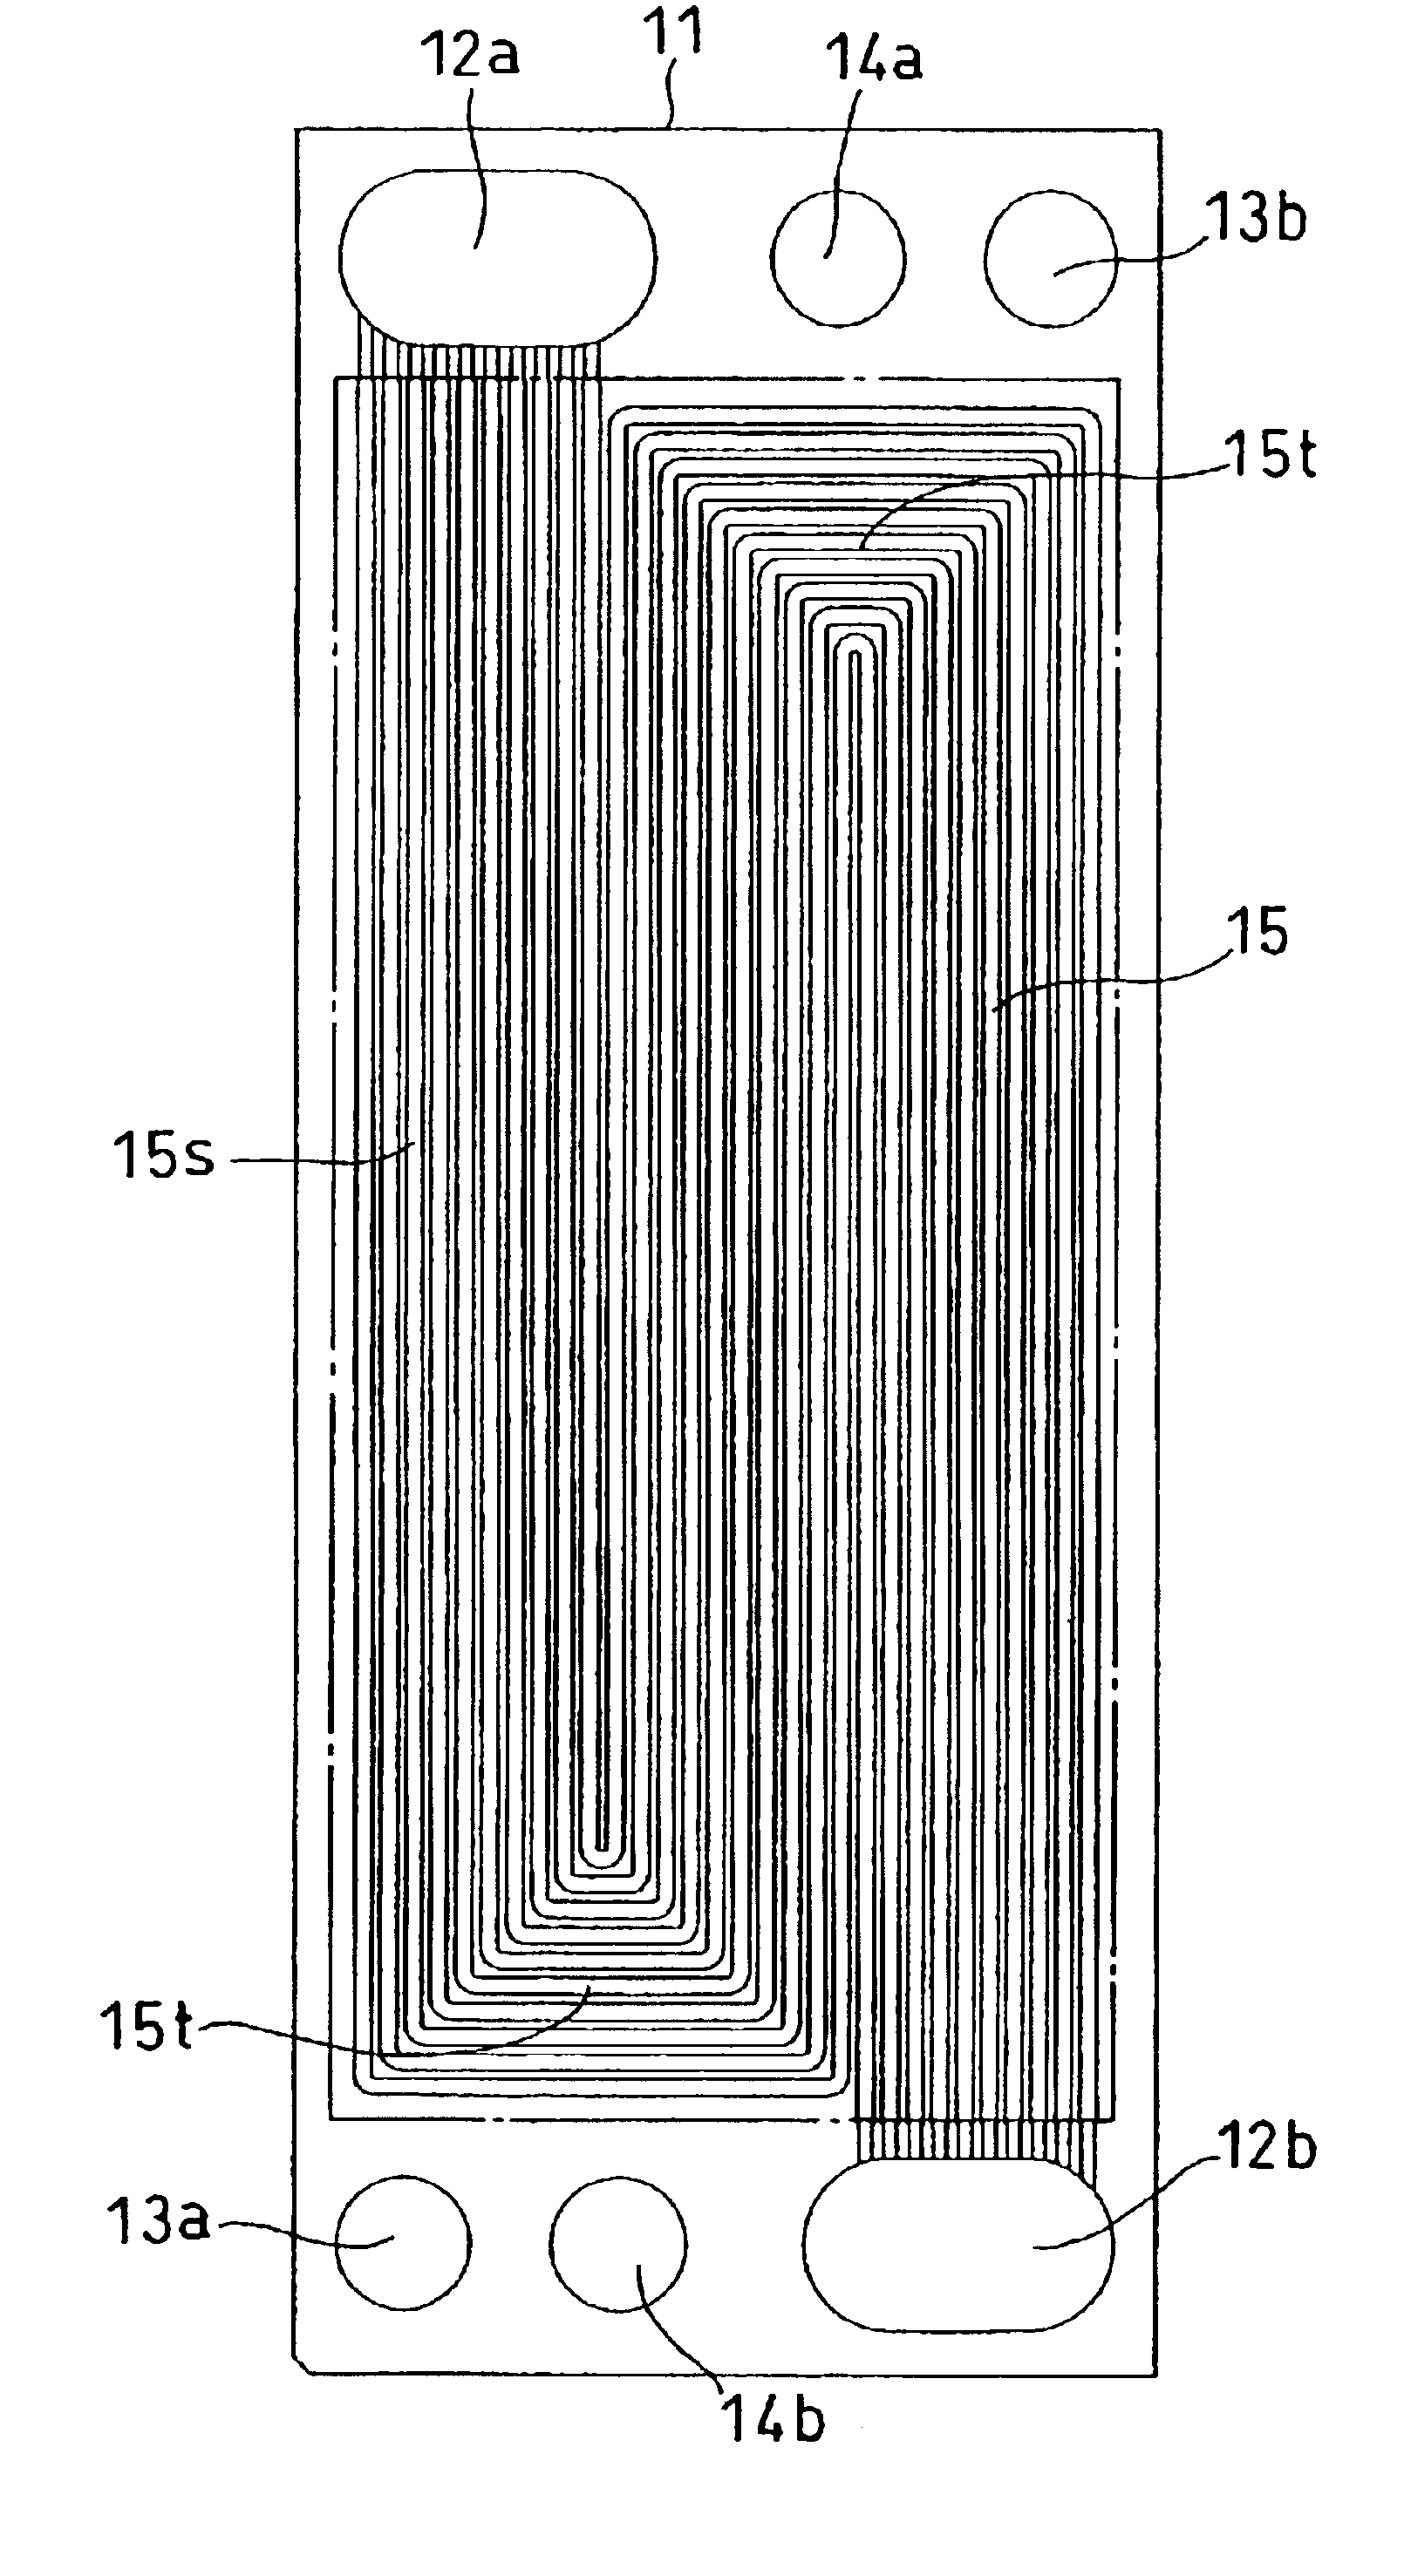 Polymer electrolyte fuel cell